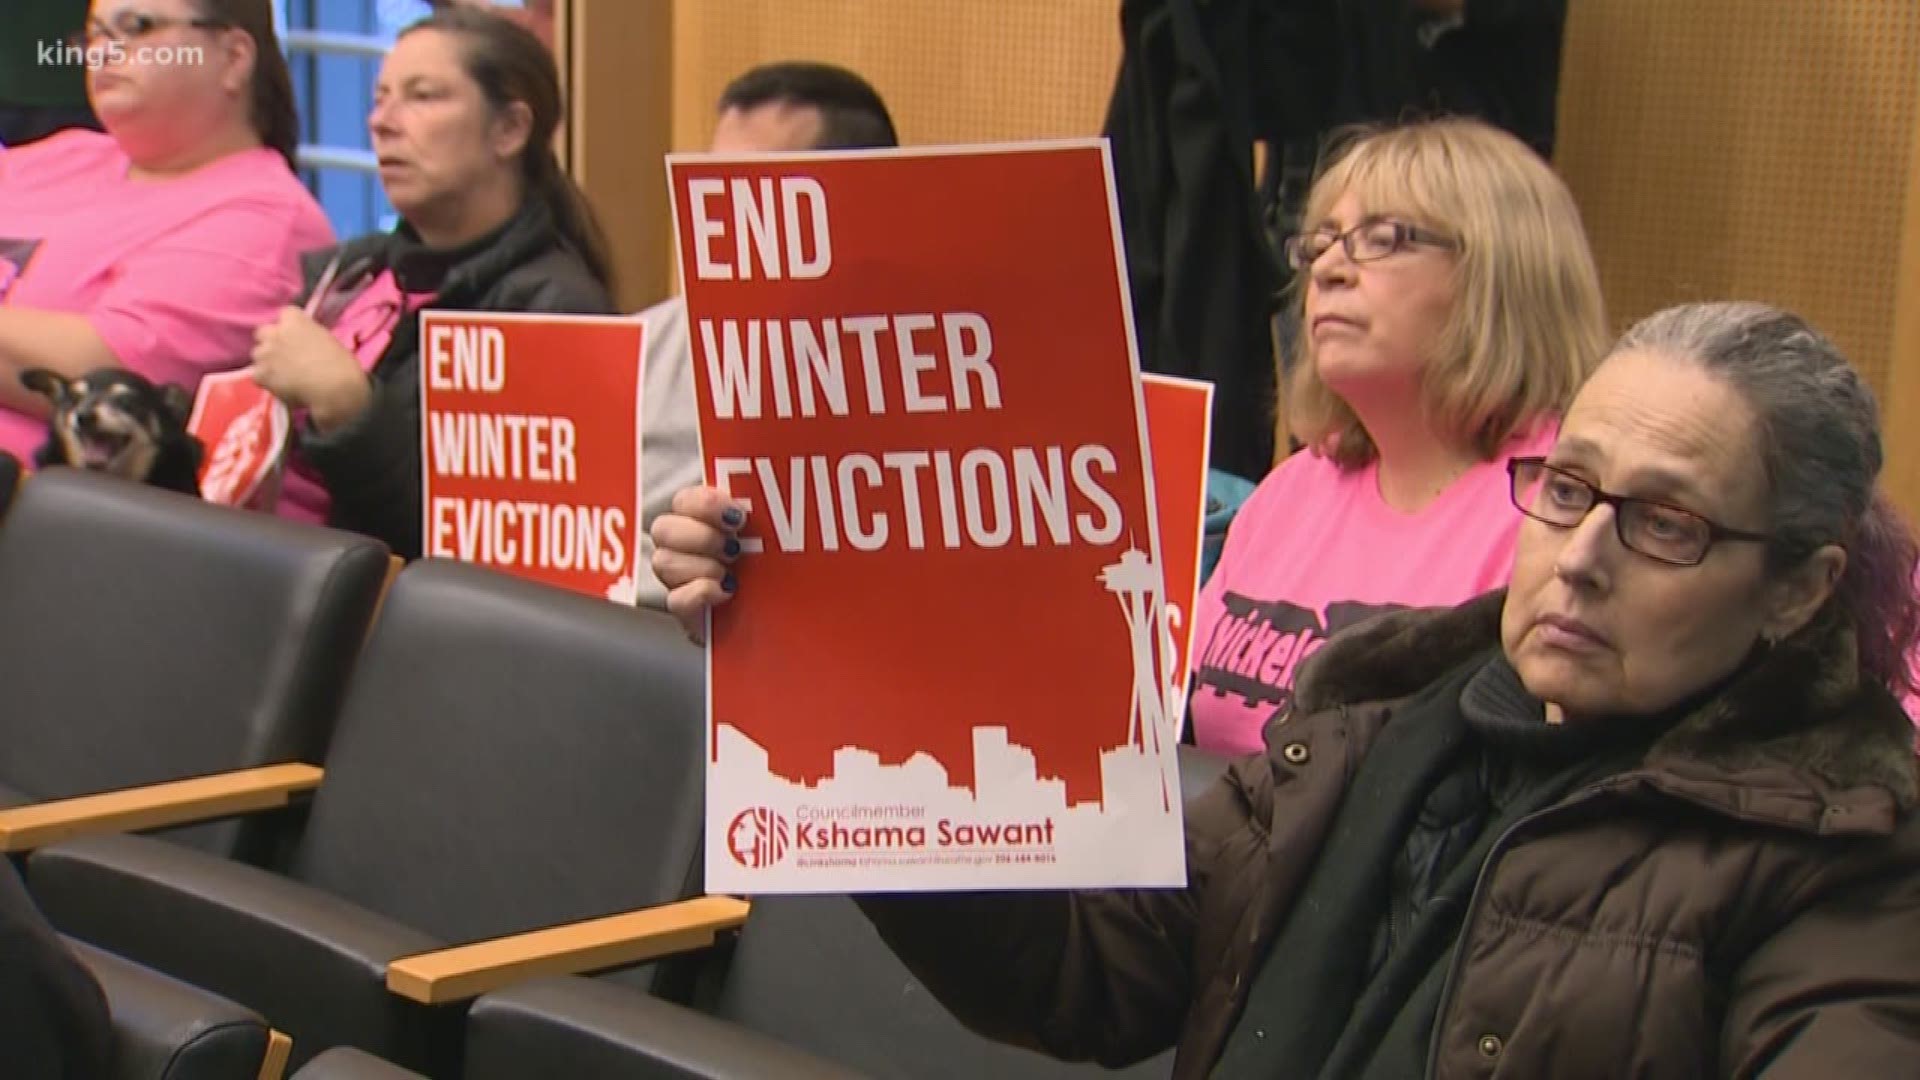 A proposal was brought forth to the Seattle City Council to not evict renters during the winter months.